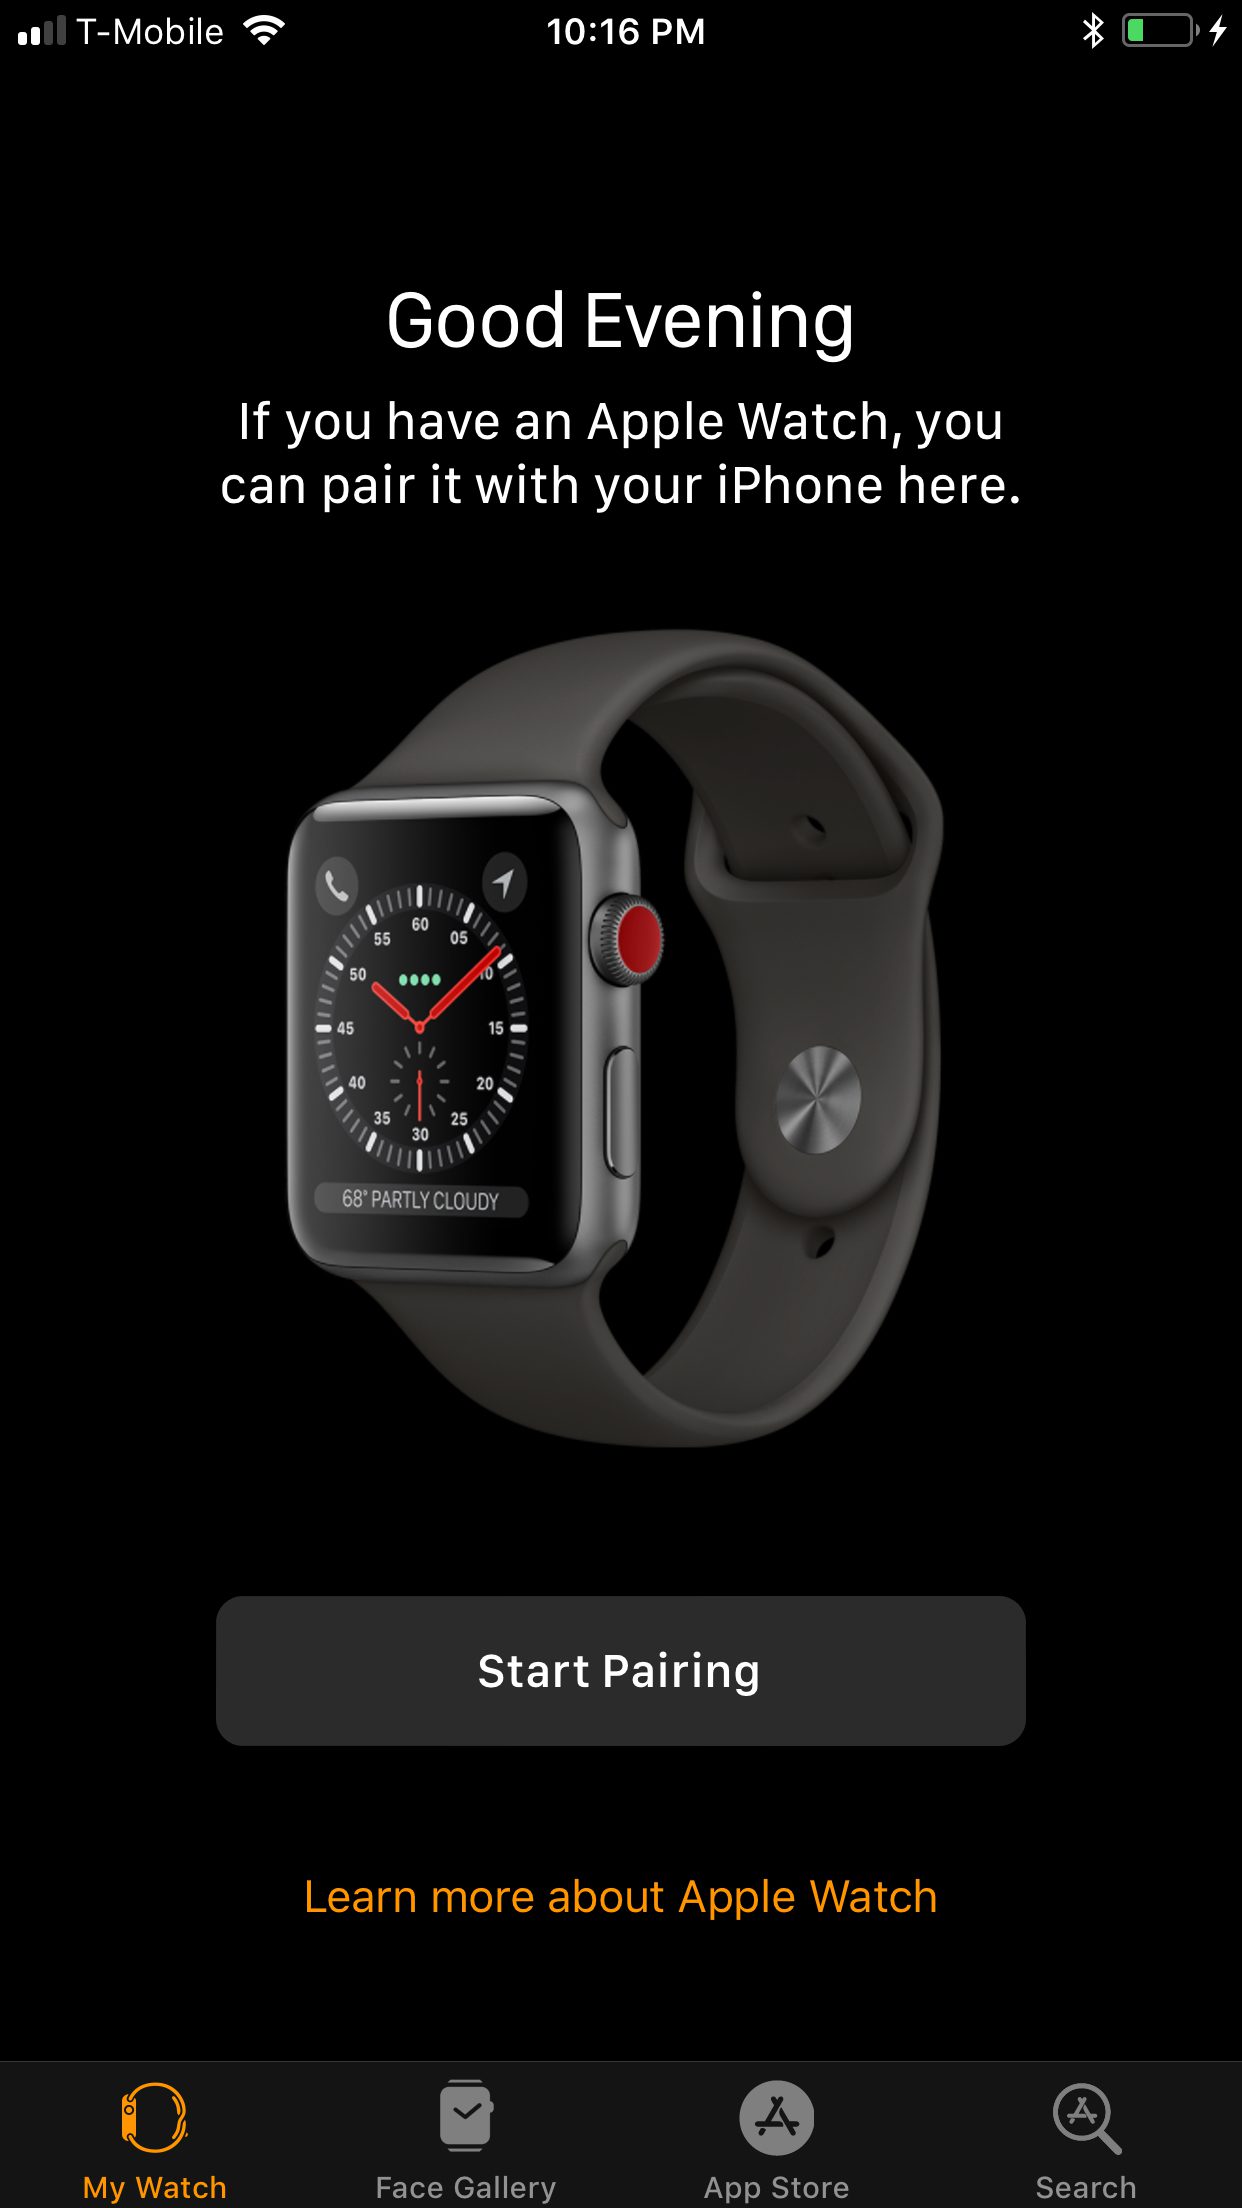 The next Apple Watch will have LTE cell service